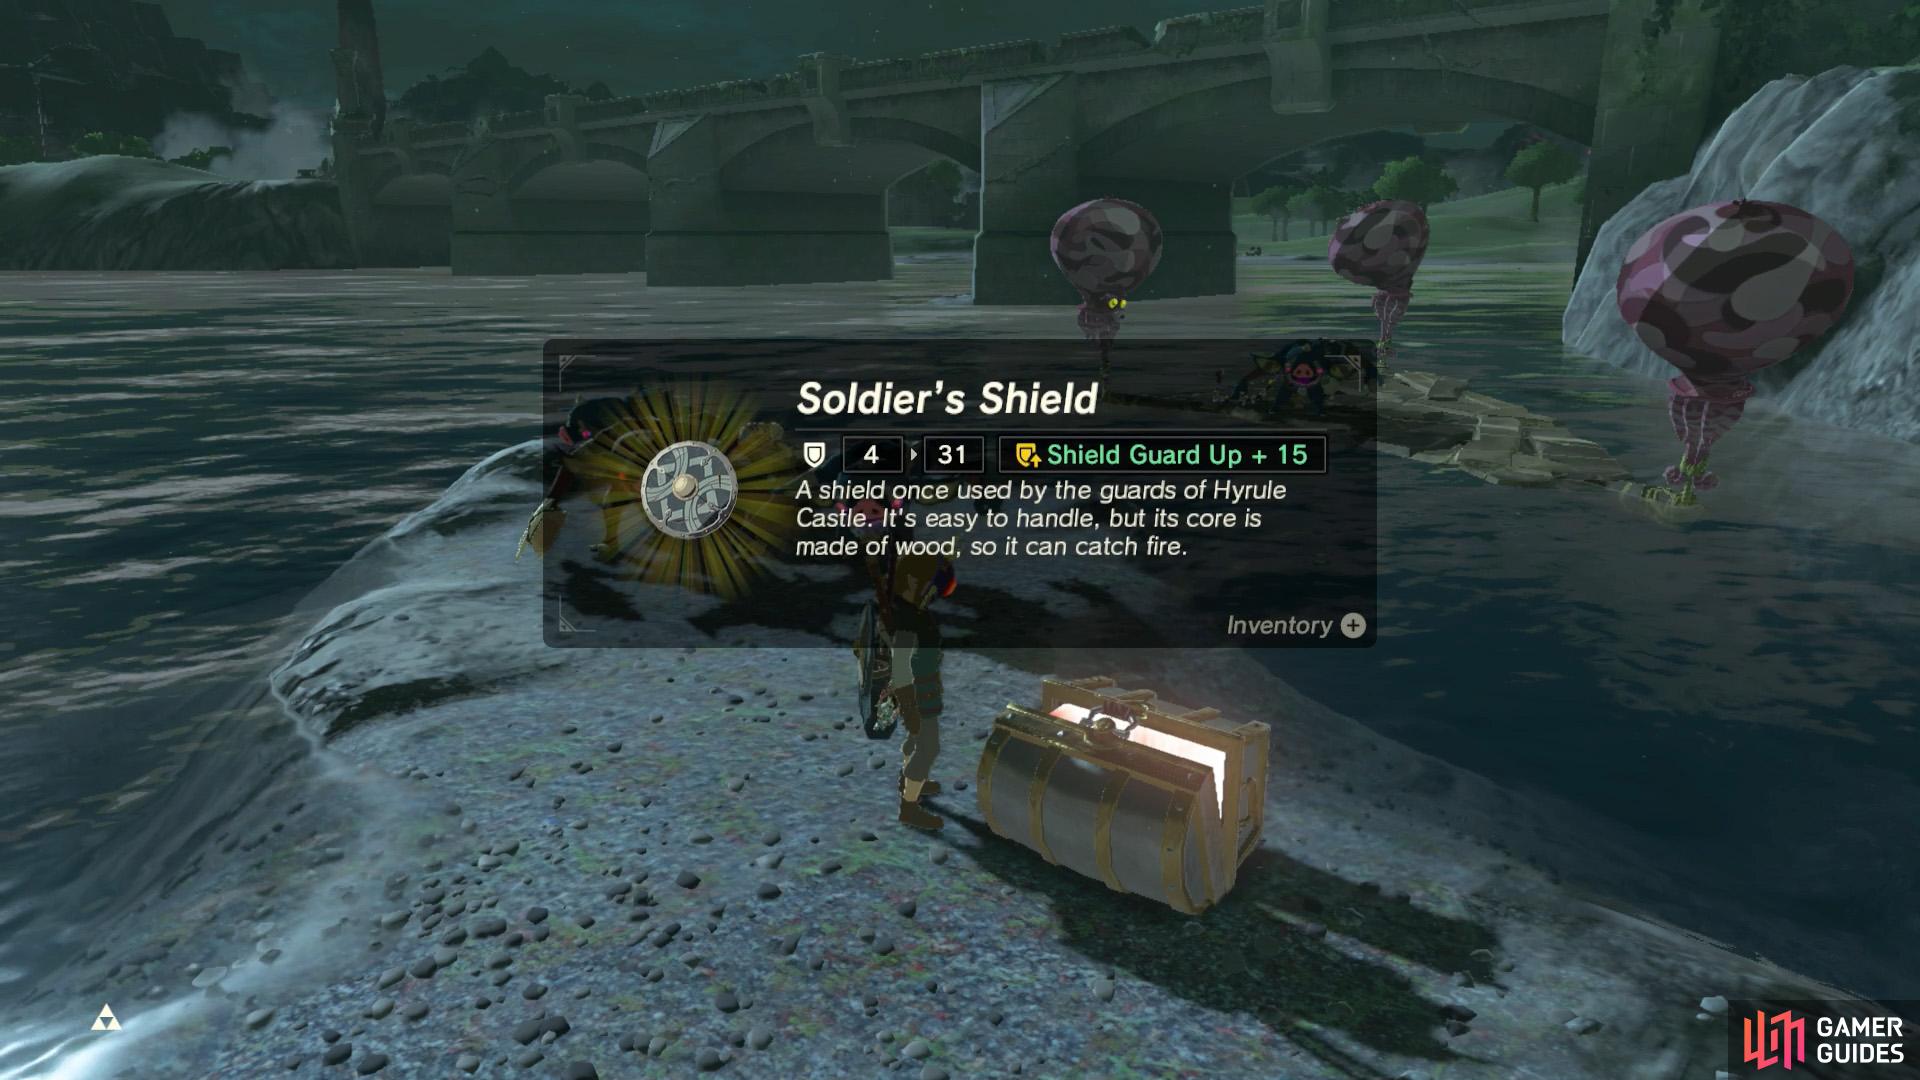 The chest contains a Soldier's Shield.